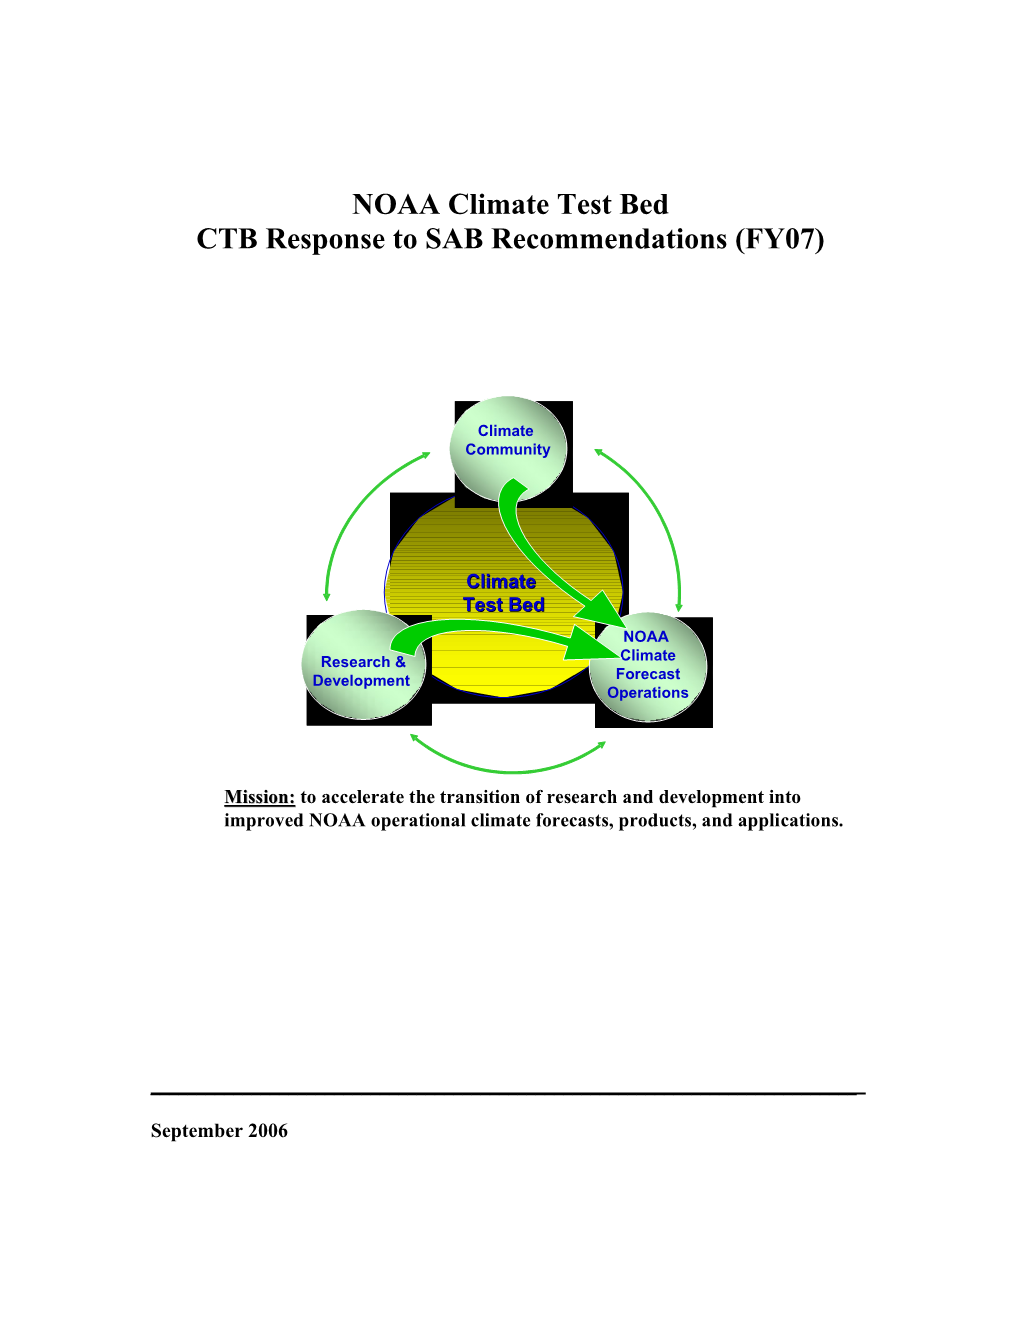 NOAA Climate Test Bed CTB Response to SAB Recommendations(FY07)